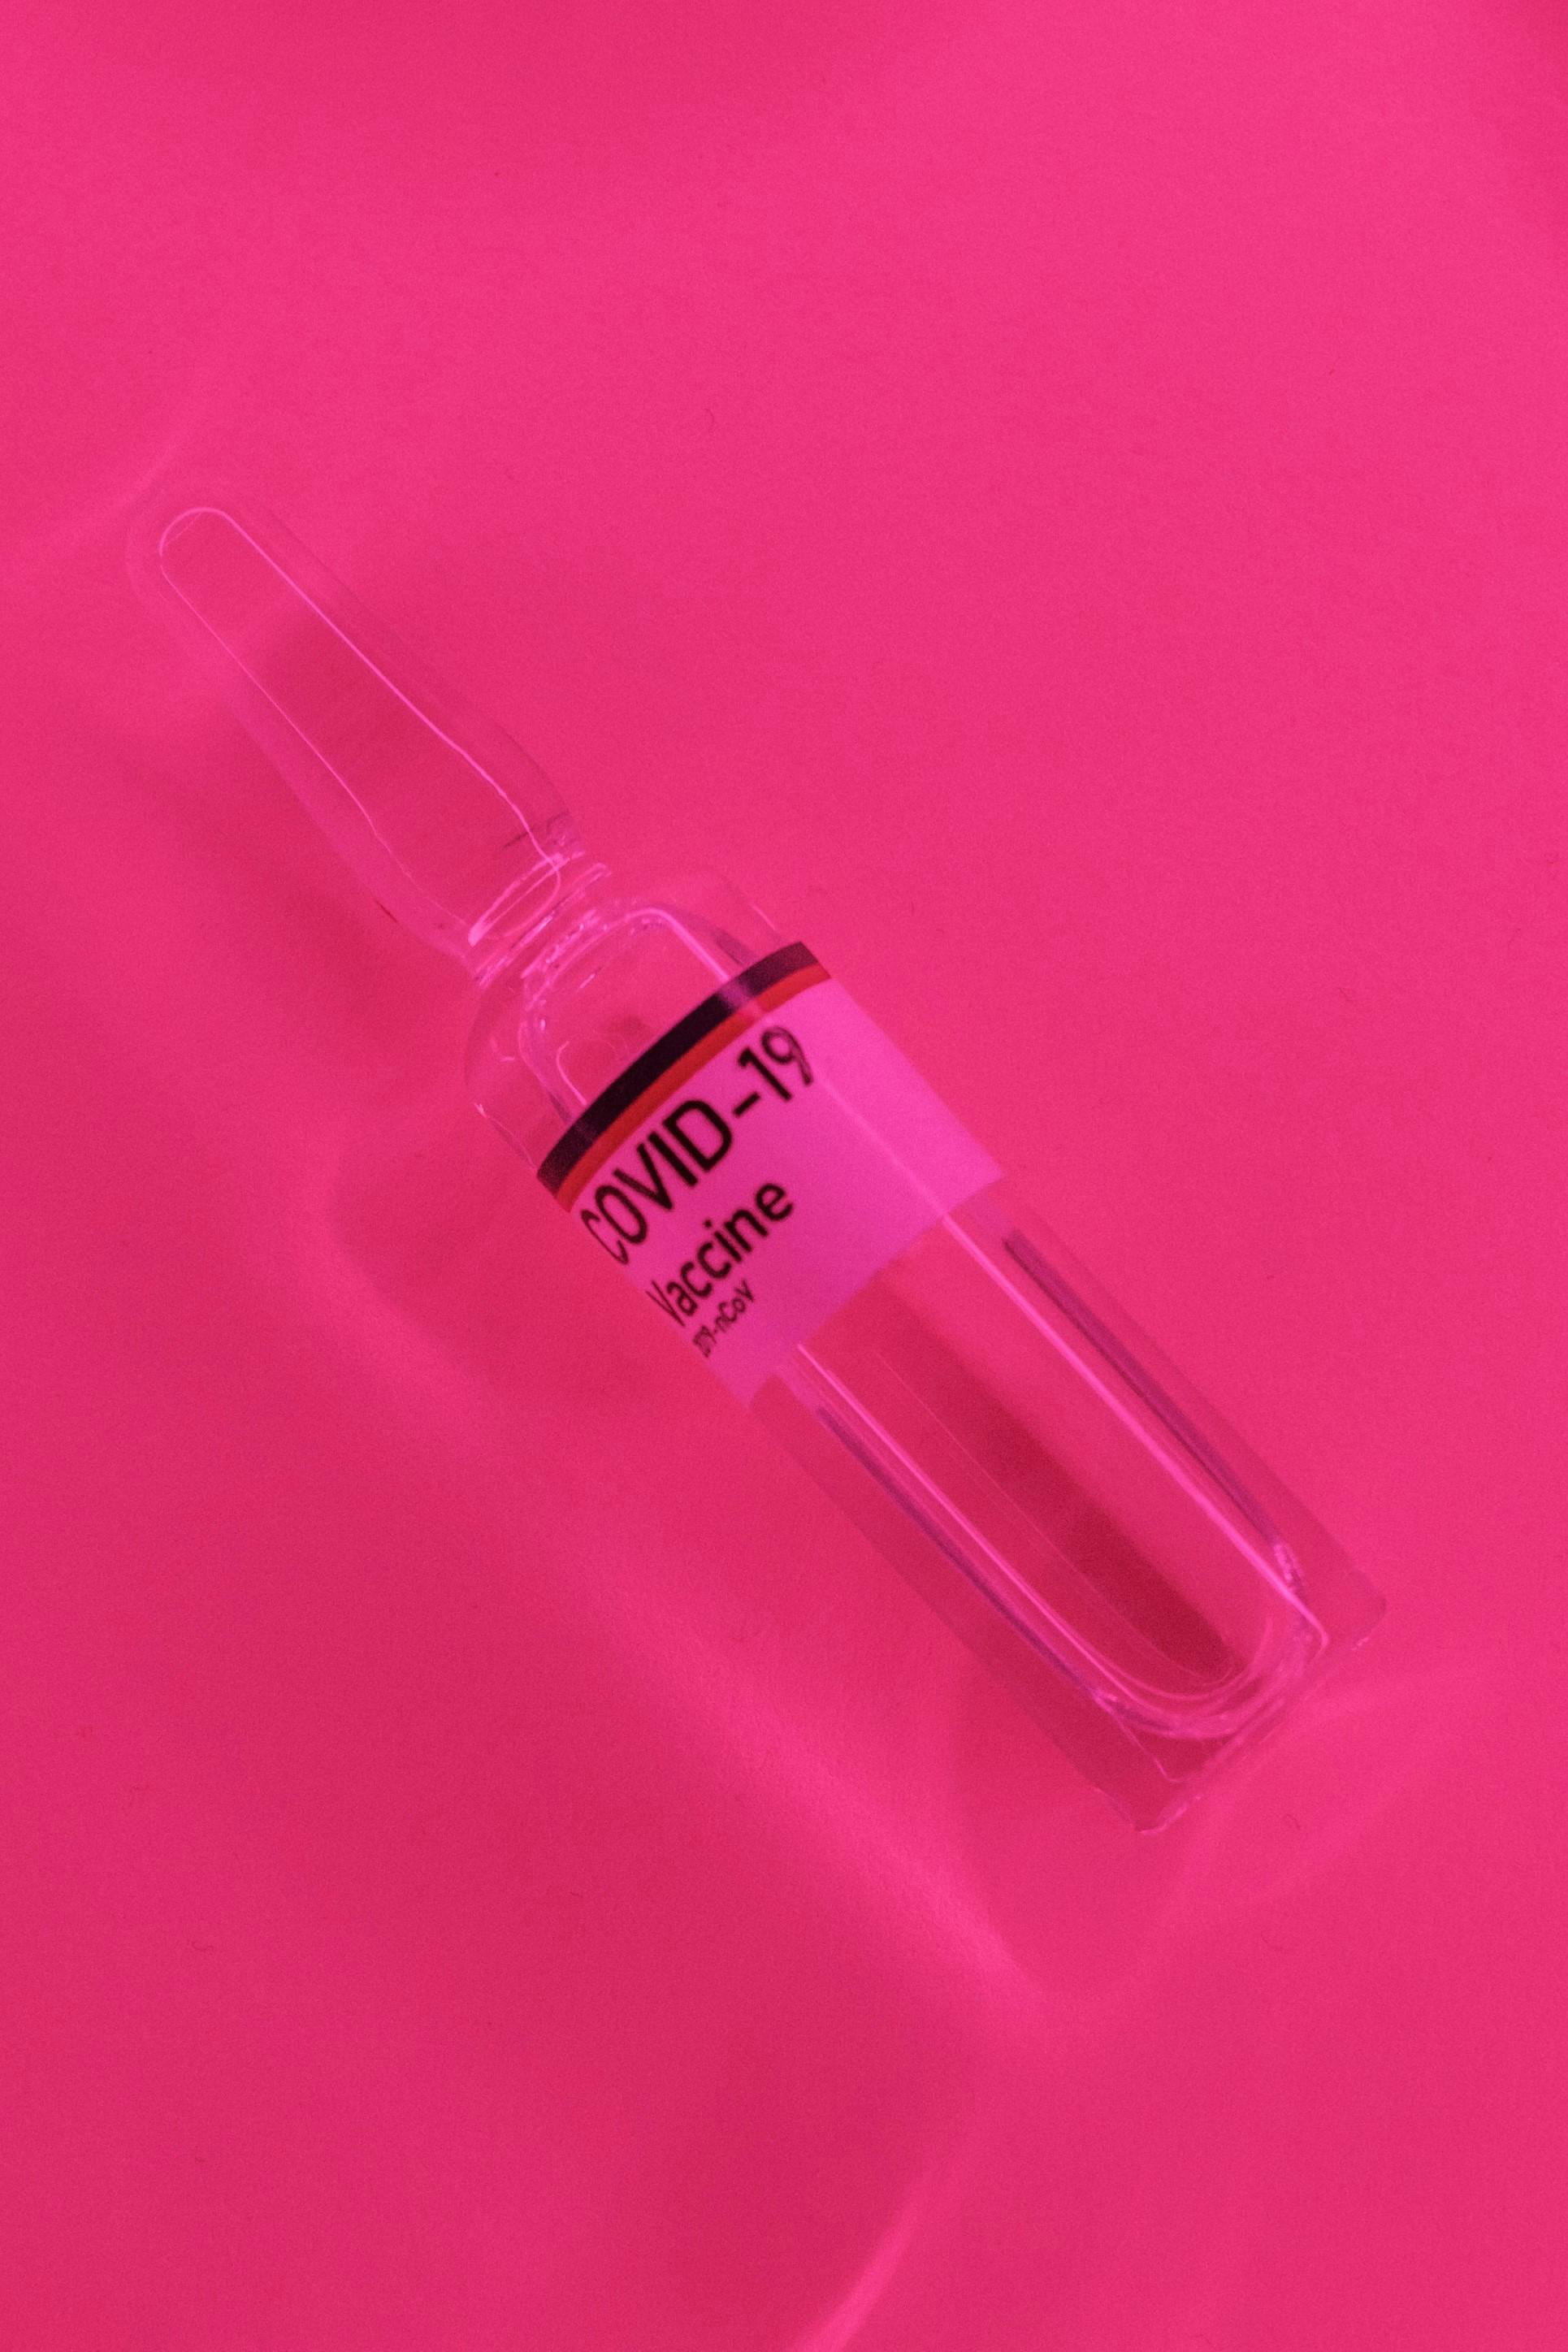 coronavirus vaccine in glass vial laced on vivid pink surface